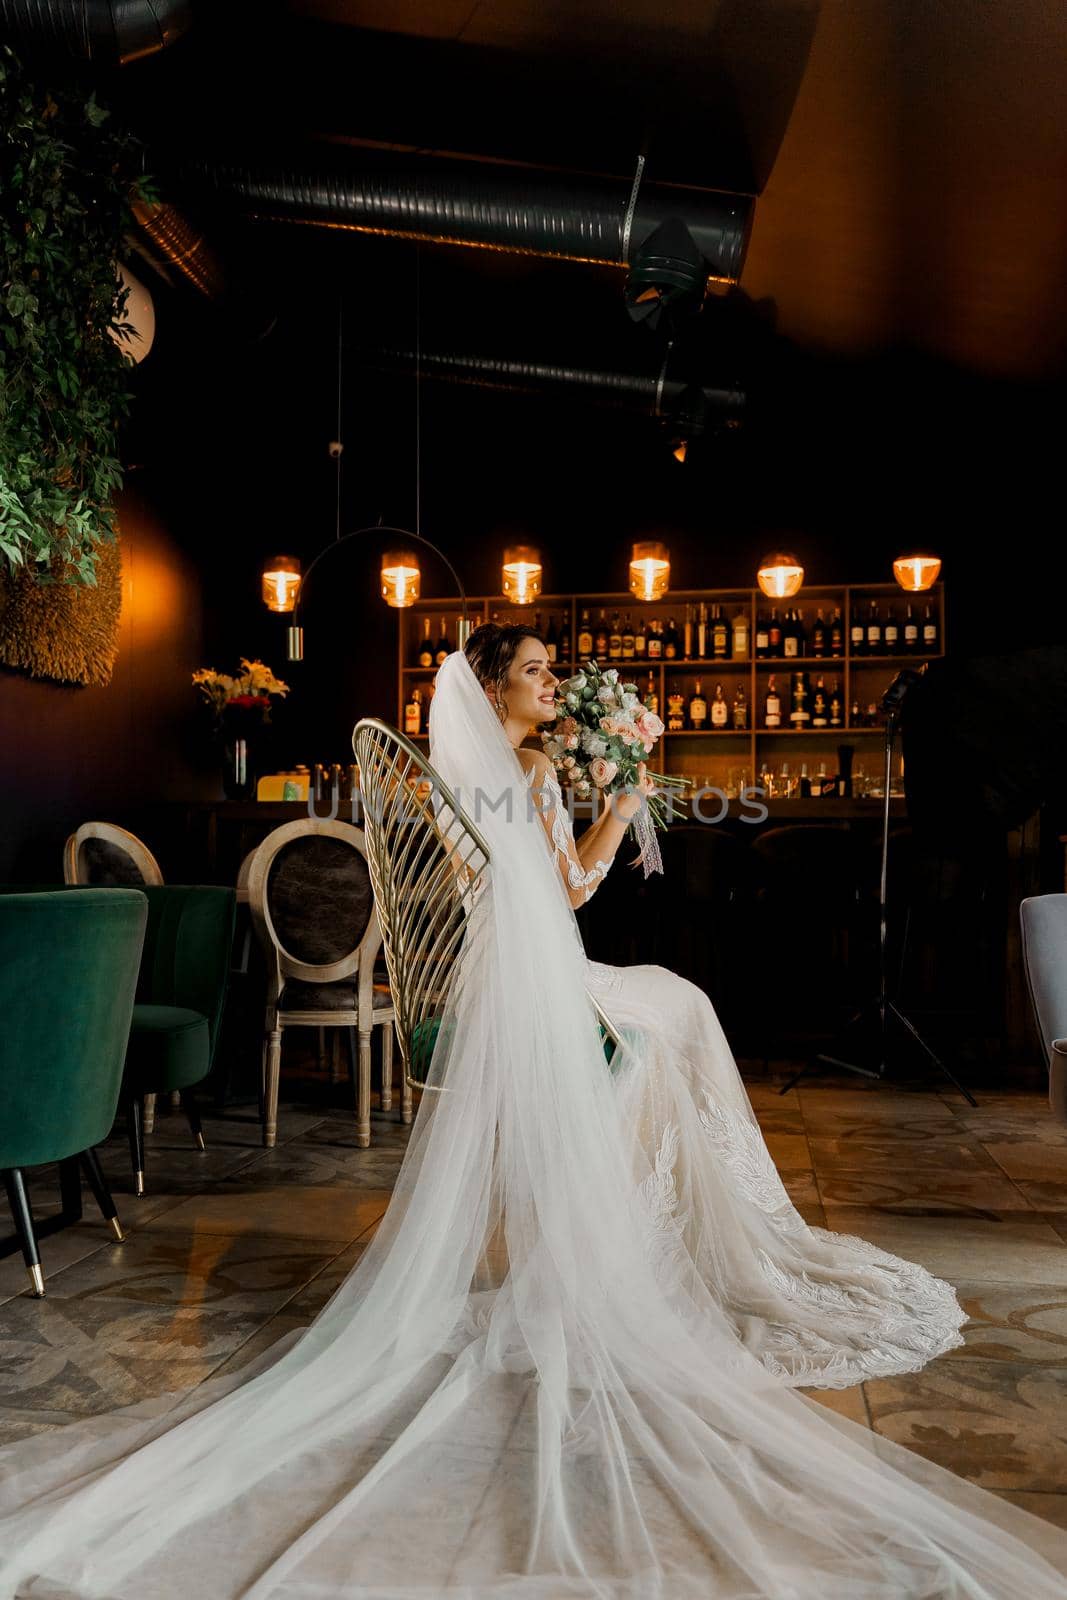 Bride in wedding dress and bridal veil seats on fashion chair in cafe. Advert for social networks for wedding agency and bridal salon by Rabizo